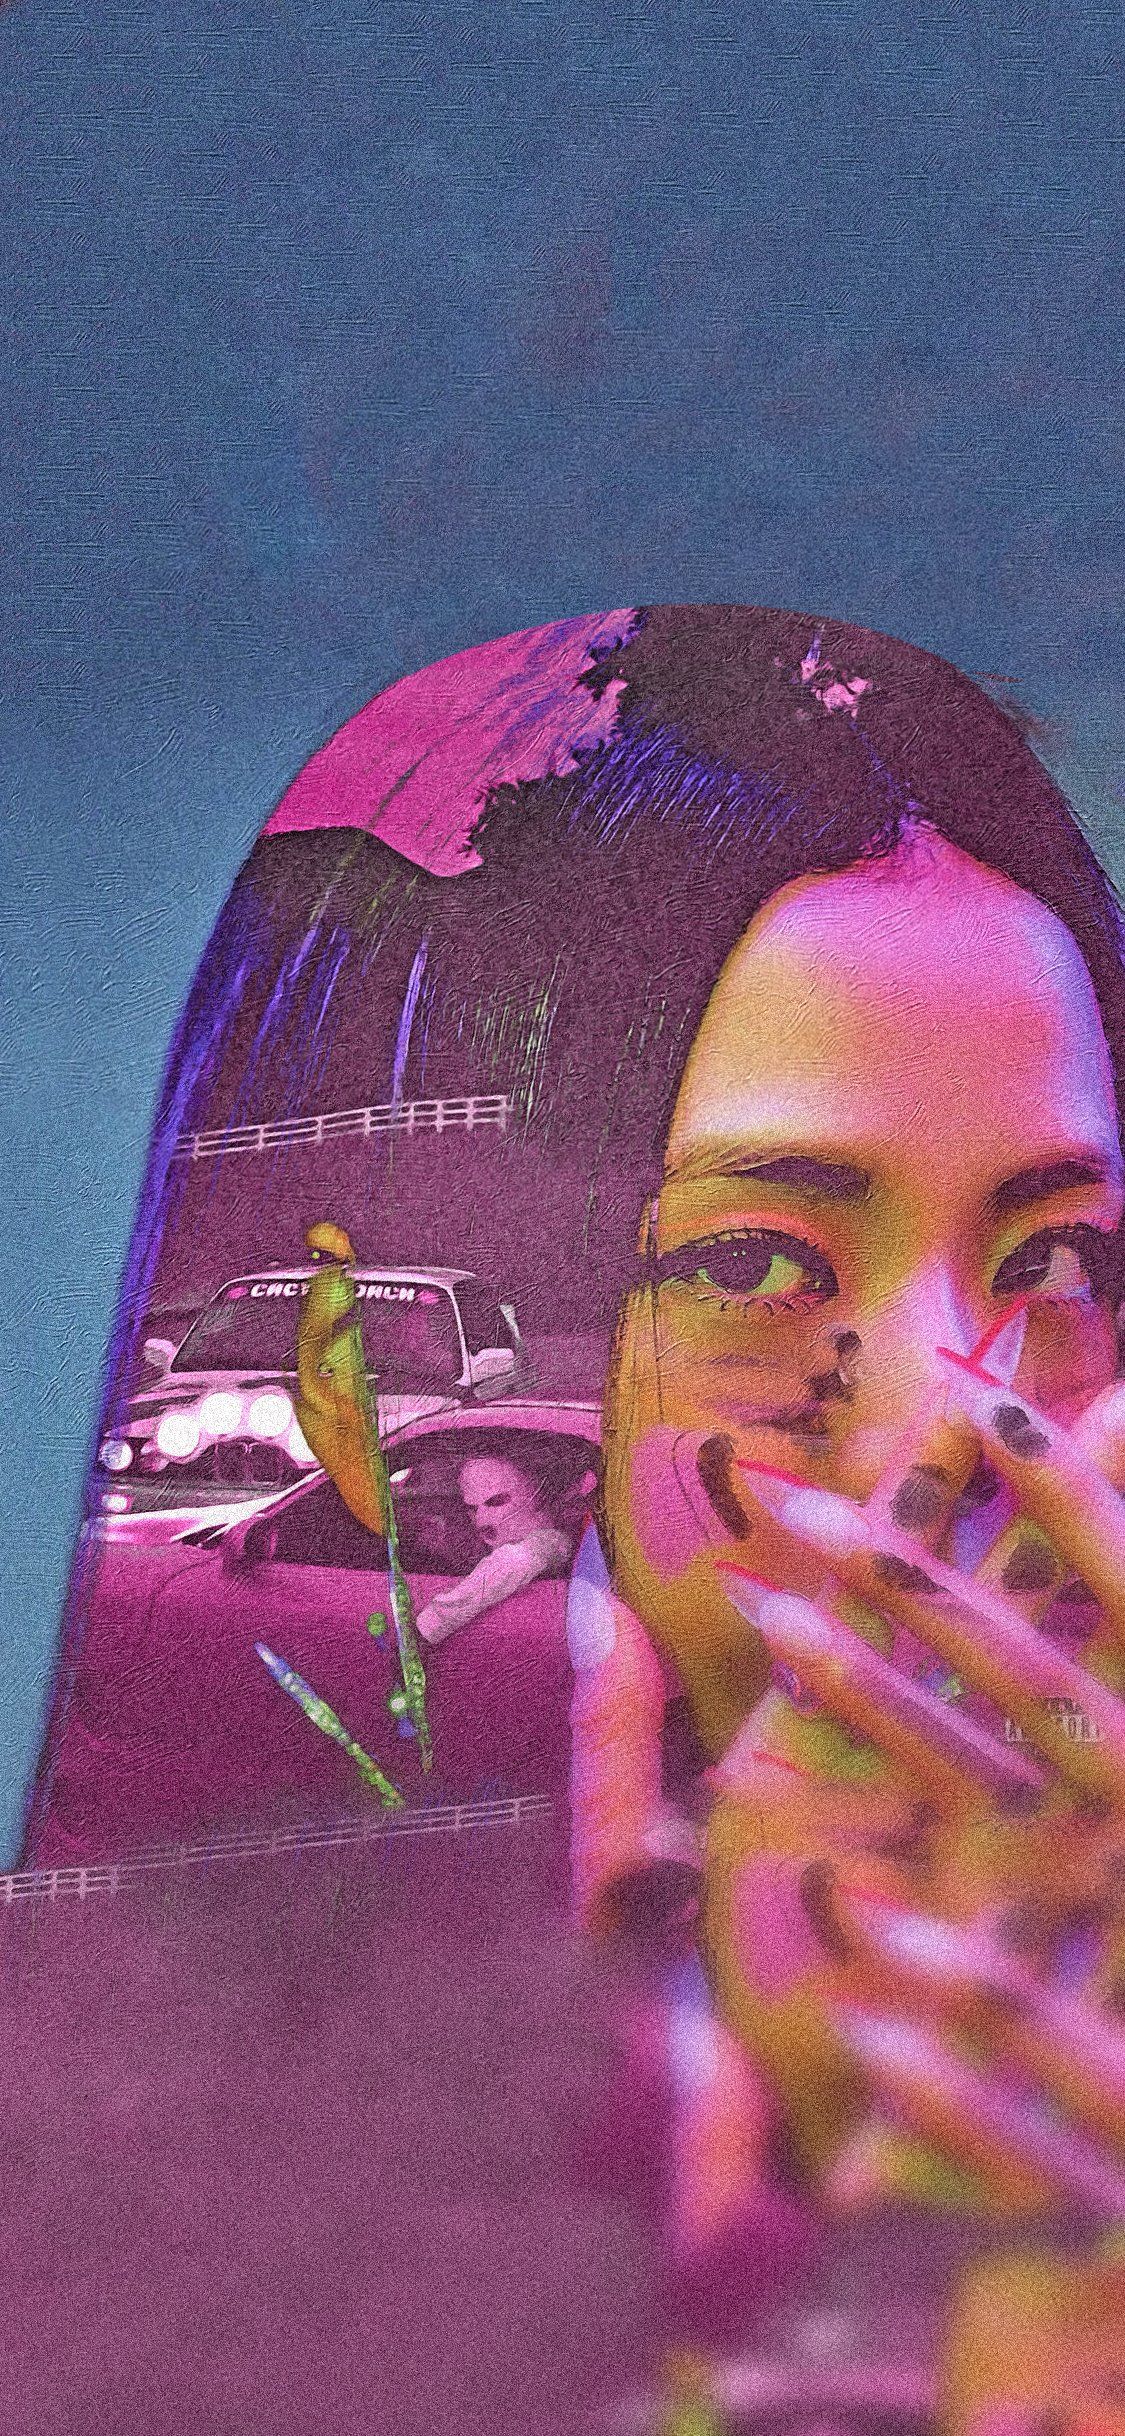 Aesthetic collage of a woman smoking a cigarette - Travis Scott